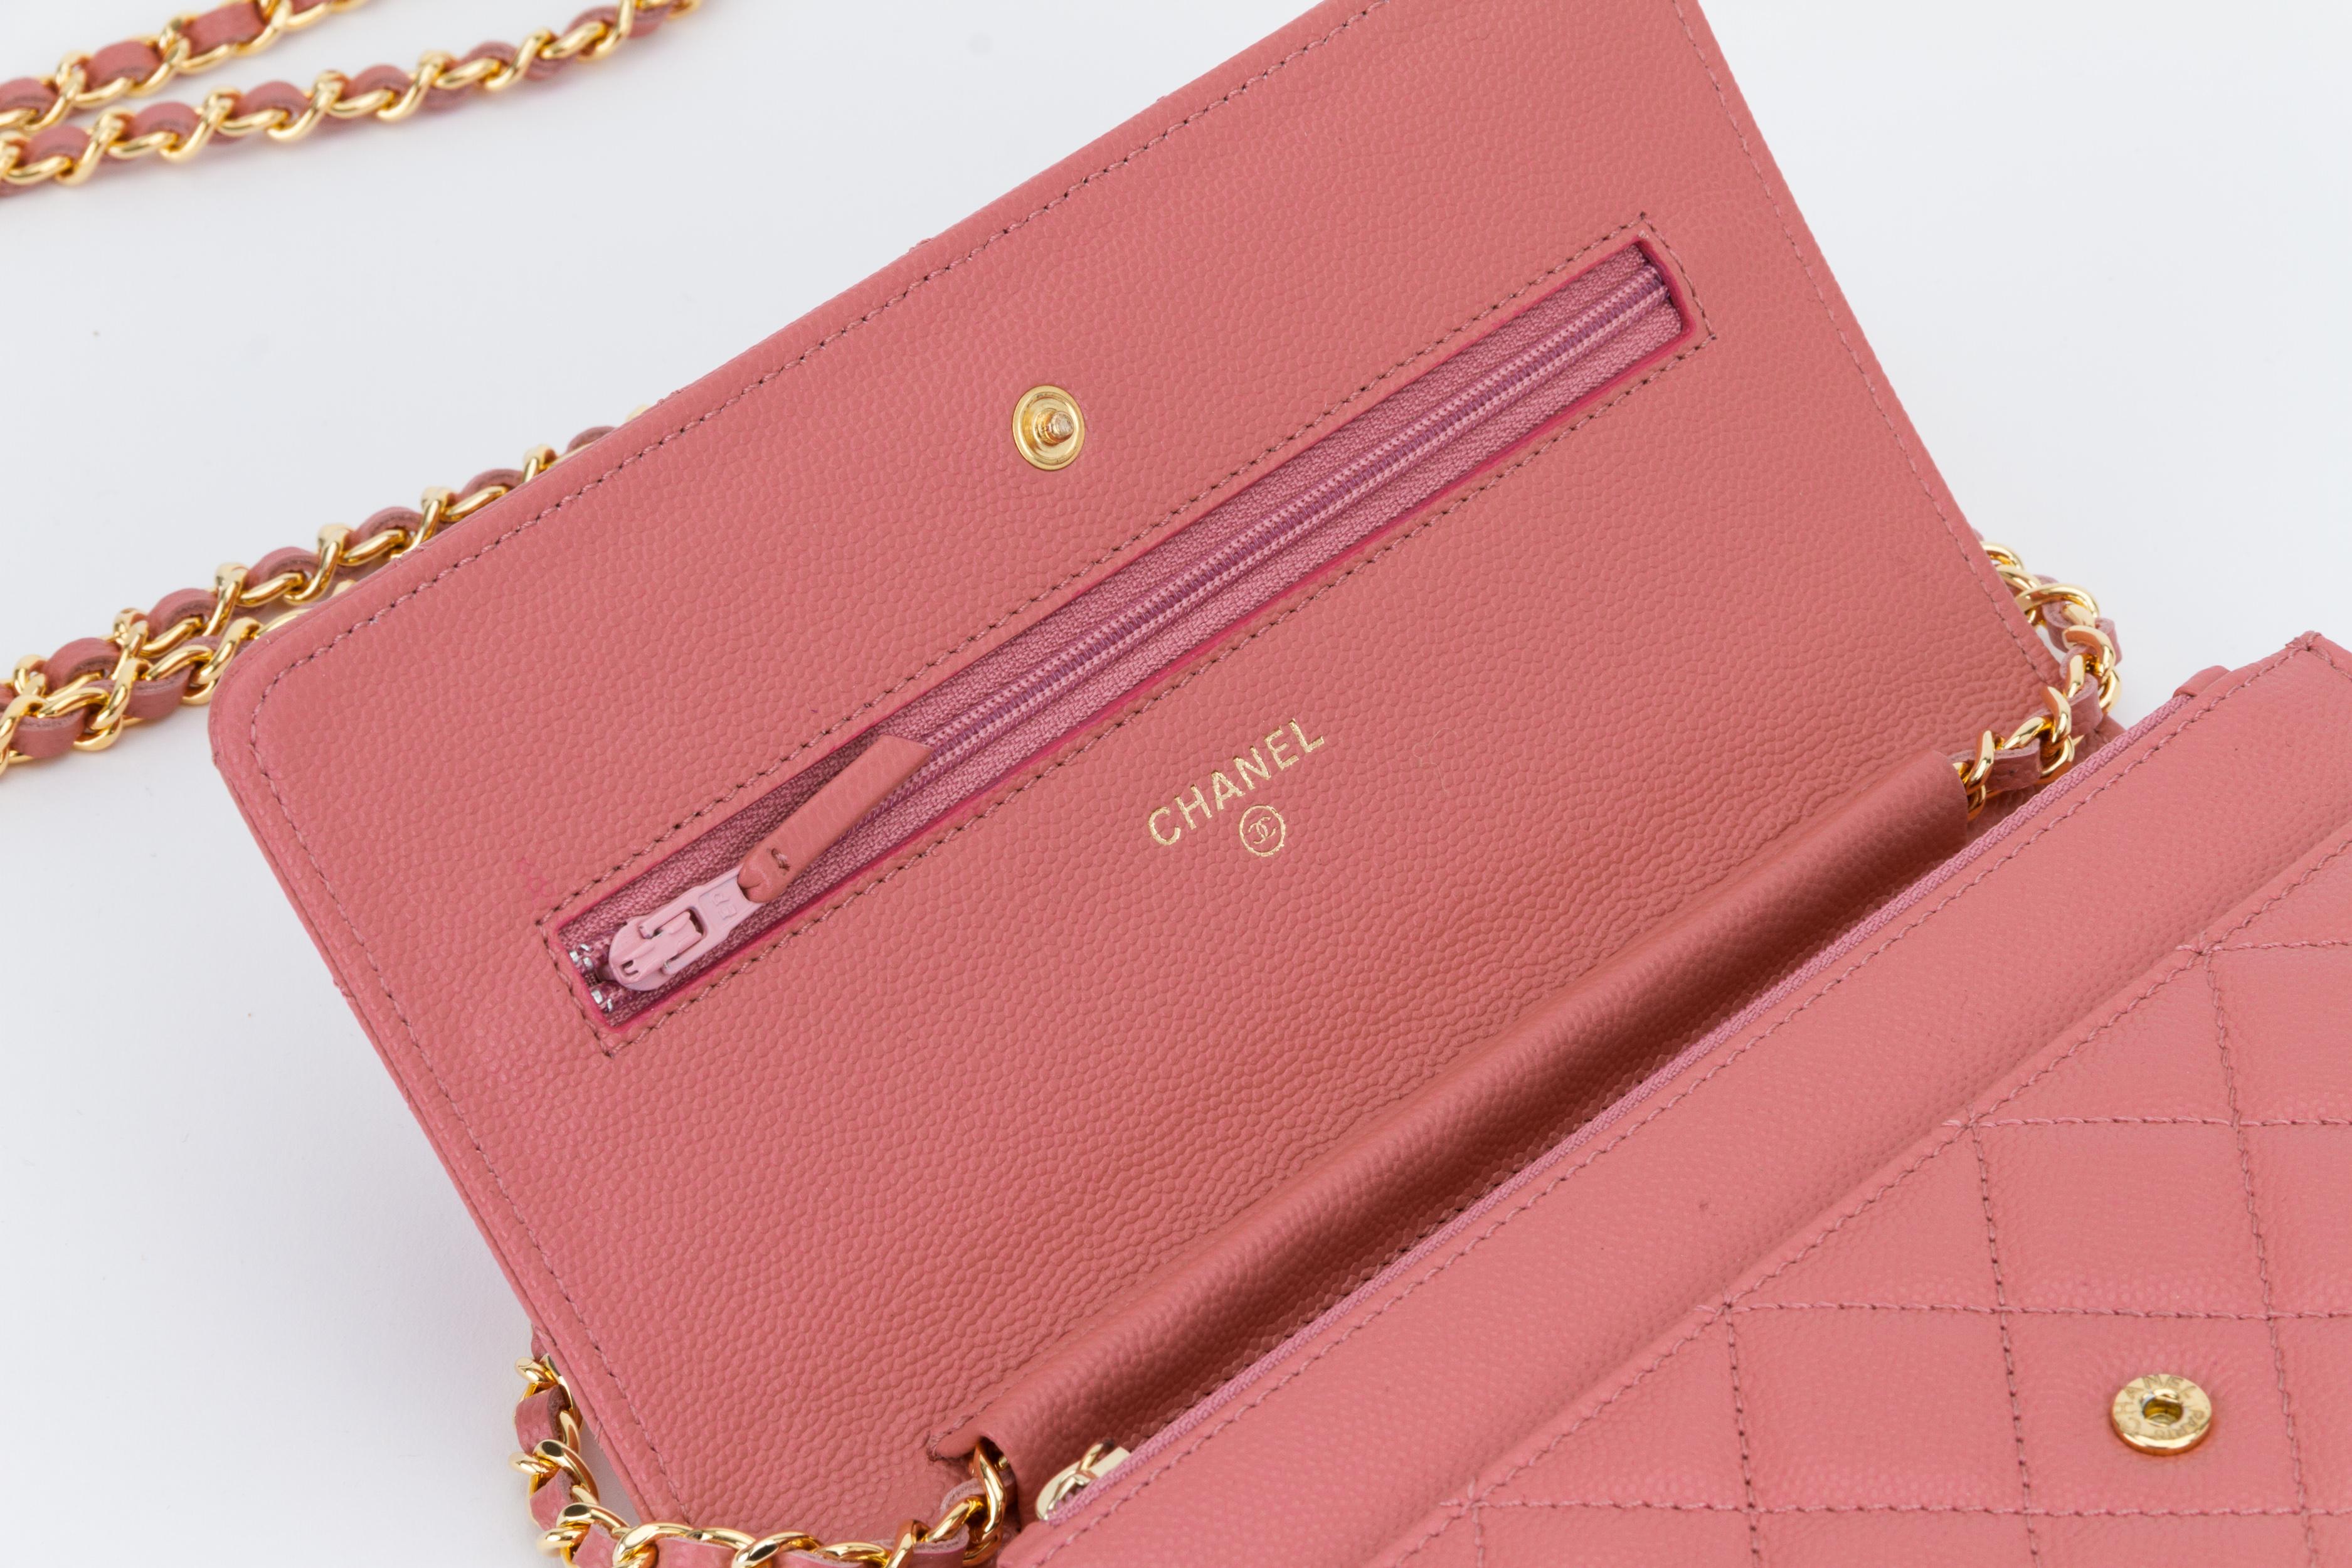 New Chanel PInk Caviar Wallet On A Chain Bag 2